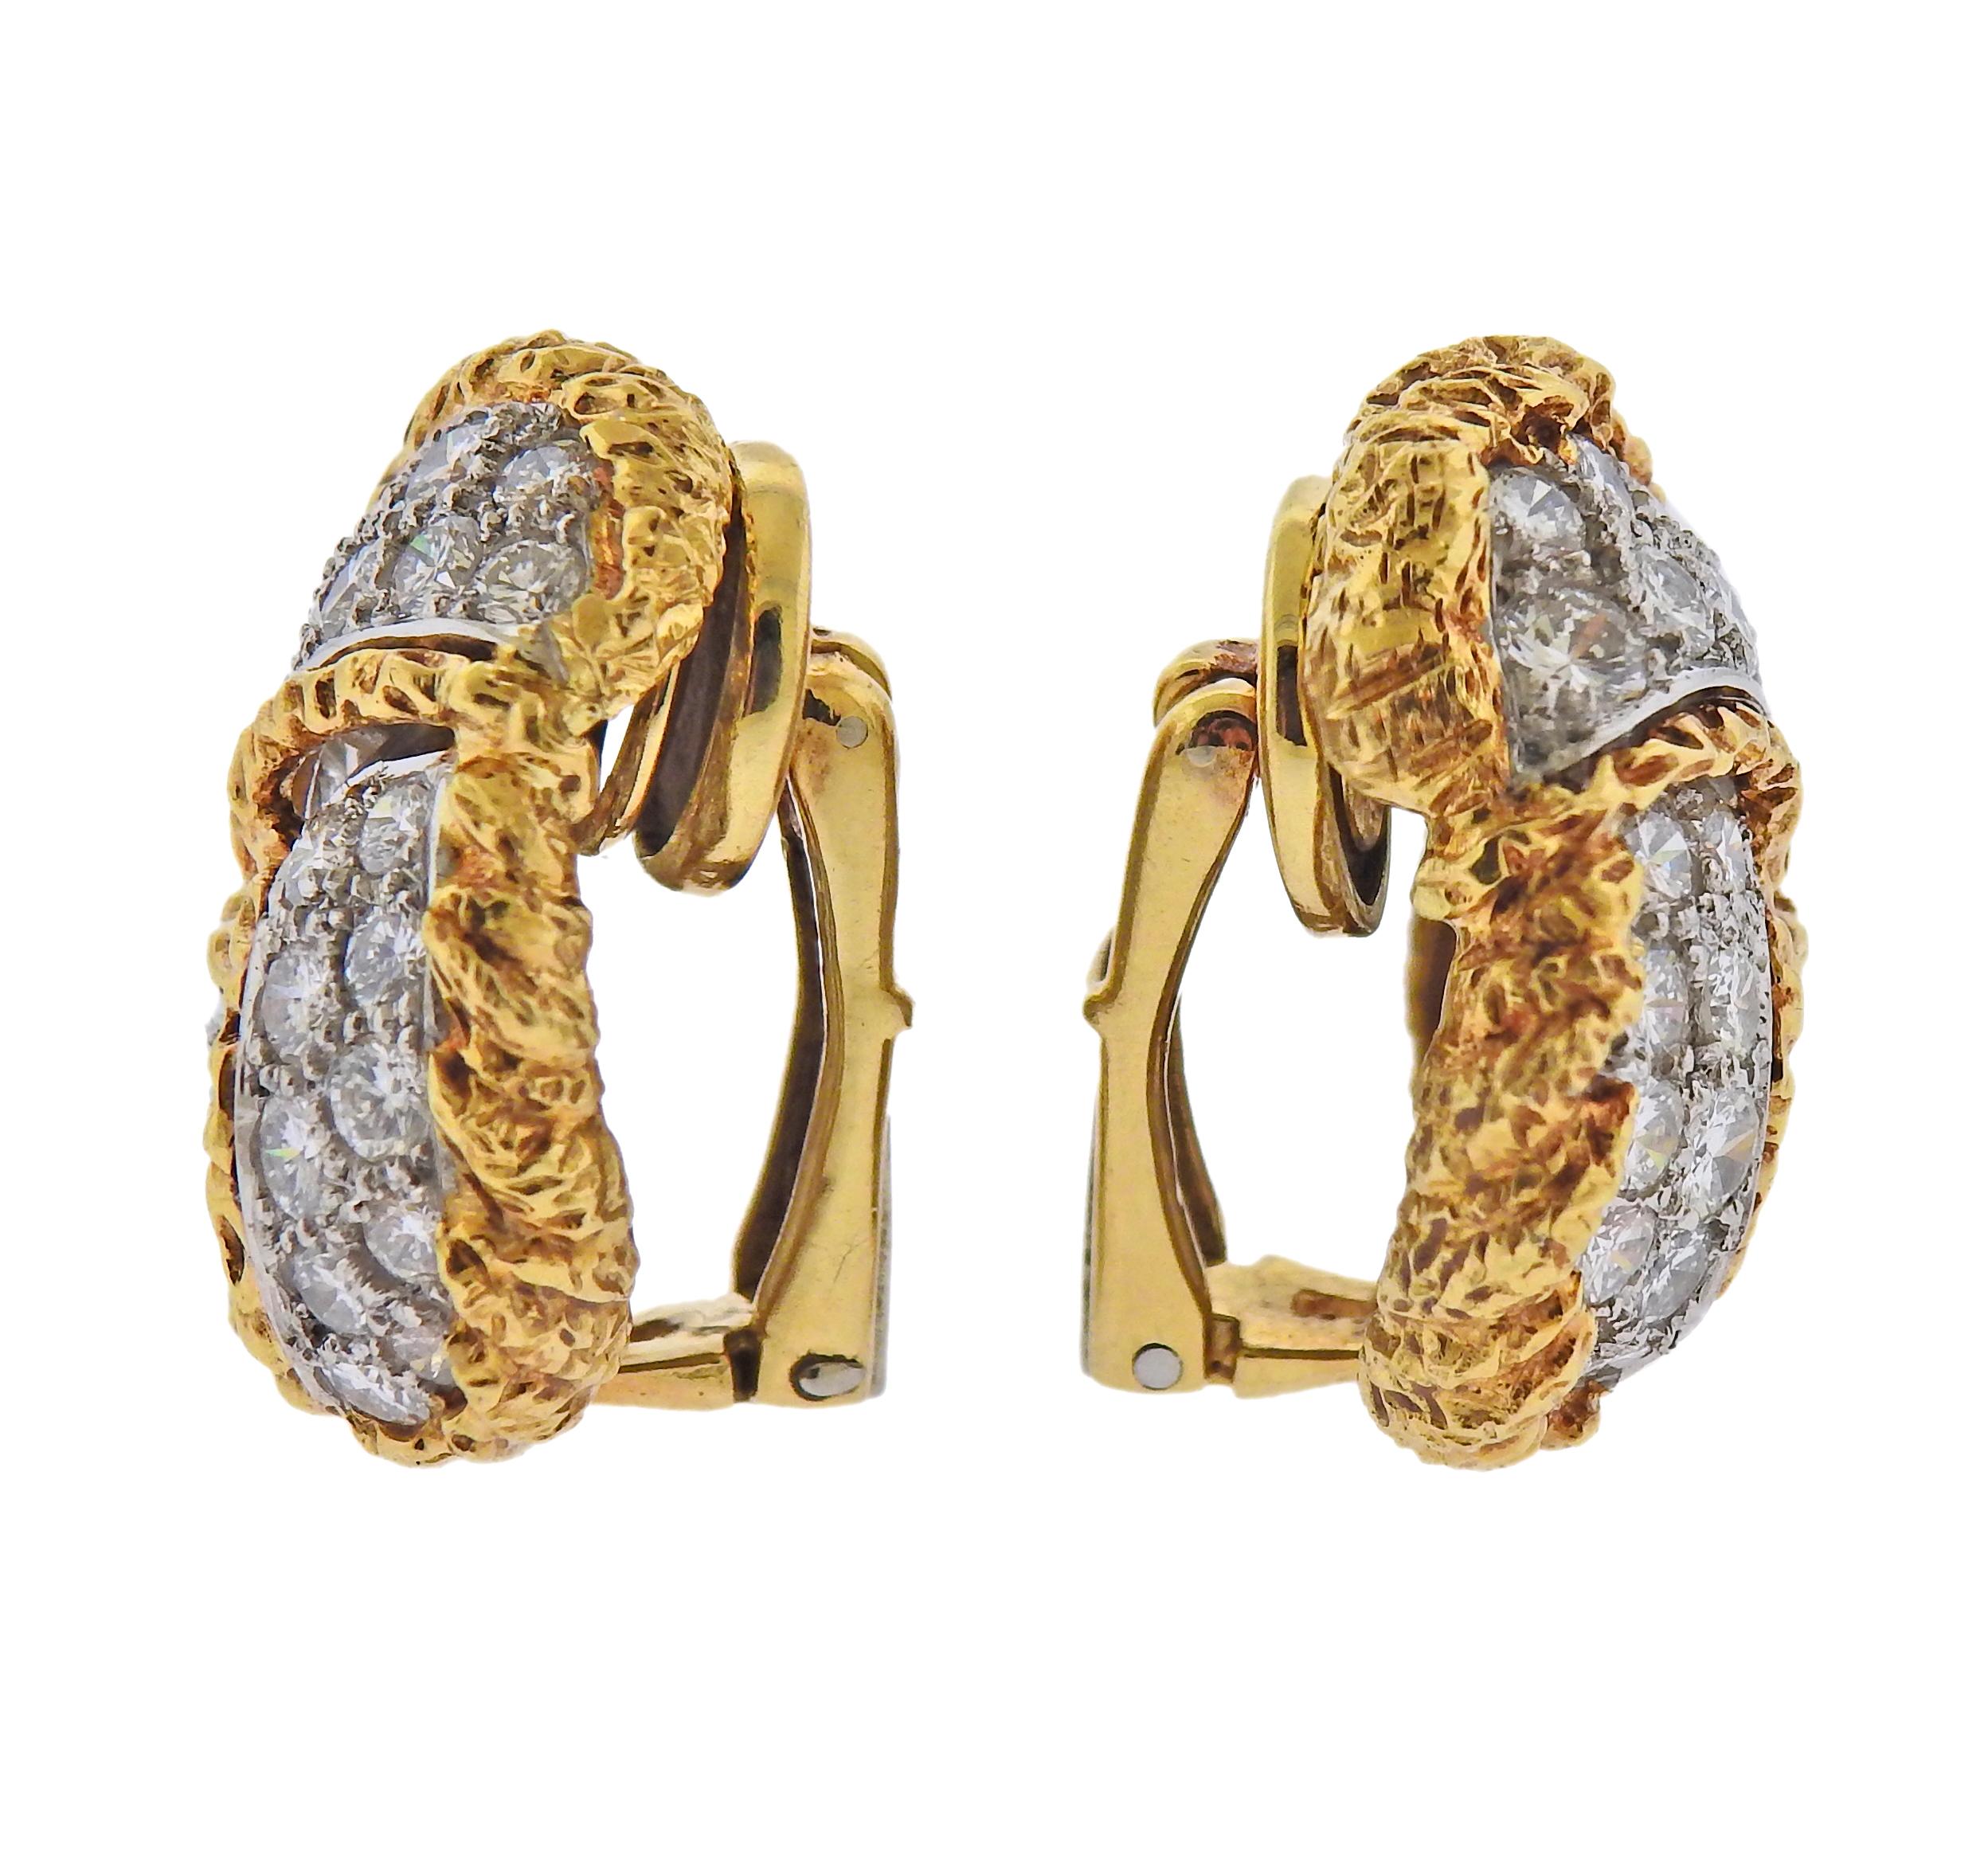 Pair of 1960s 18k gold earrings with approx. 4 carats in VS-SI1/H diamonds. Earrings measure 25mm x 25mm. Marked 18k. Weight- 24.9 grams. 

